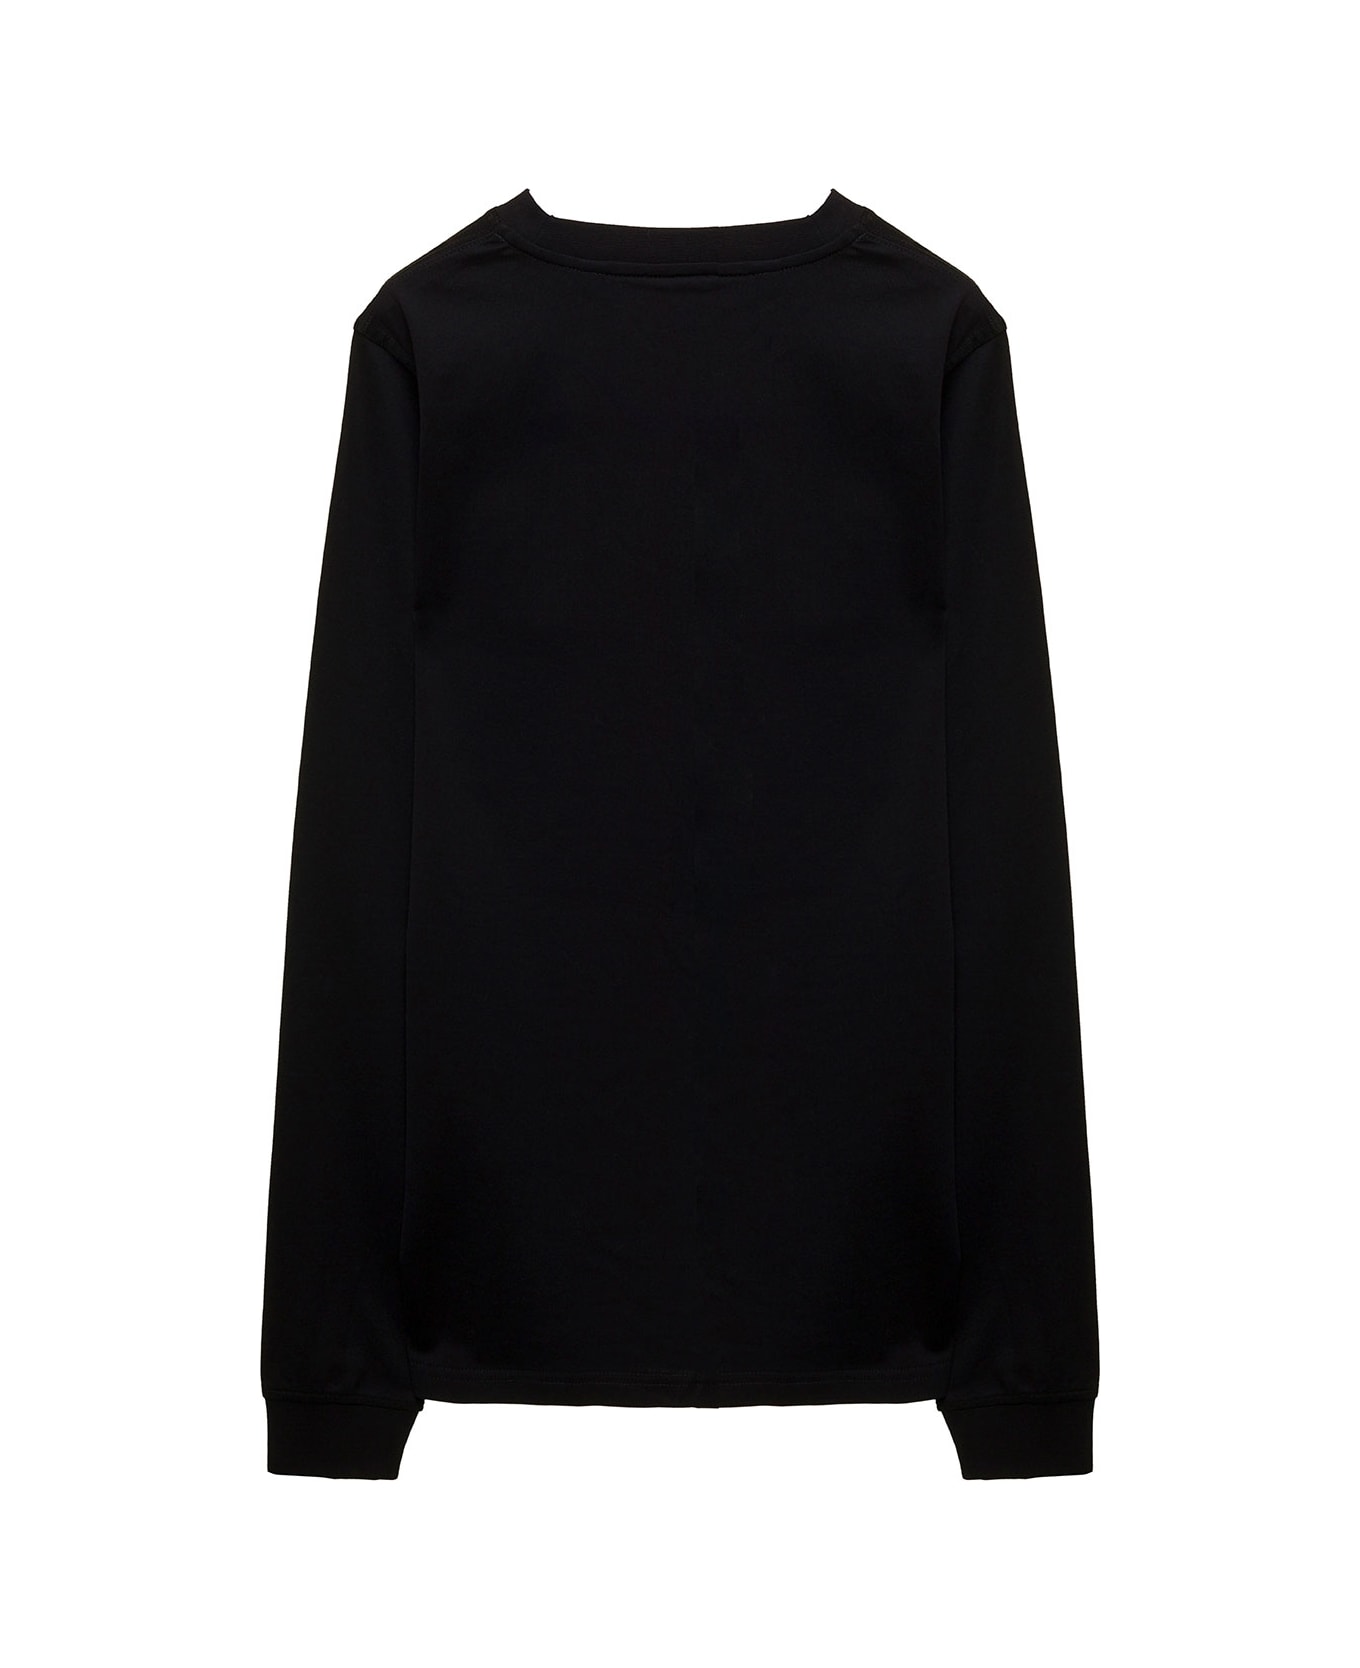 Burberry Black Sweater With Contrasting Monogram And Teddy Bear Print In Cotton Boy - Black